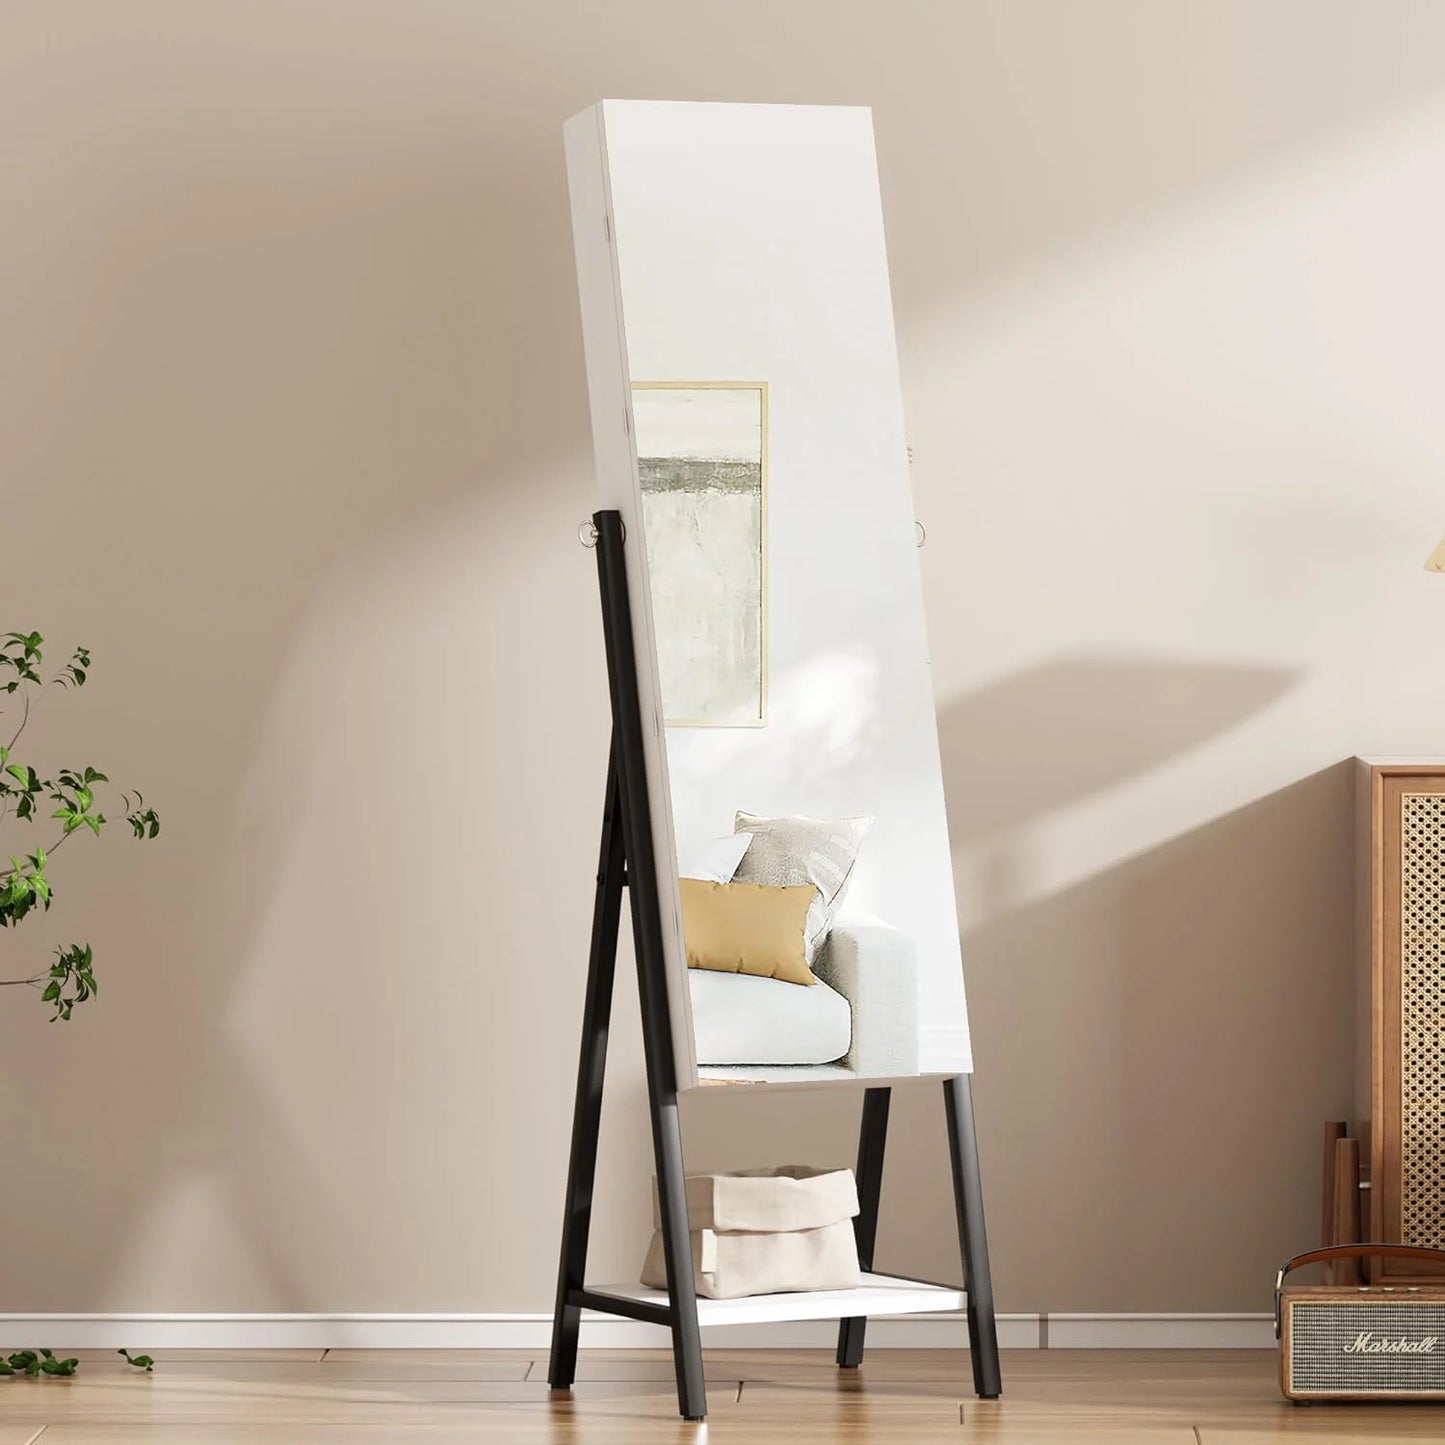 Full Mirror with Stand, Cheval Mirror Cabinet, Full Length Dressing Floor Mirror with LED Light Belt, White